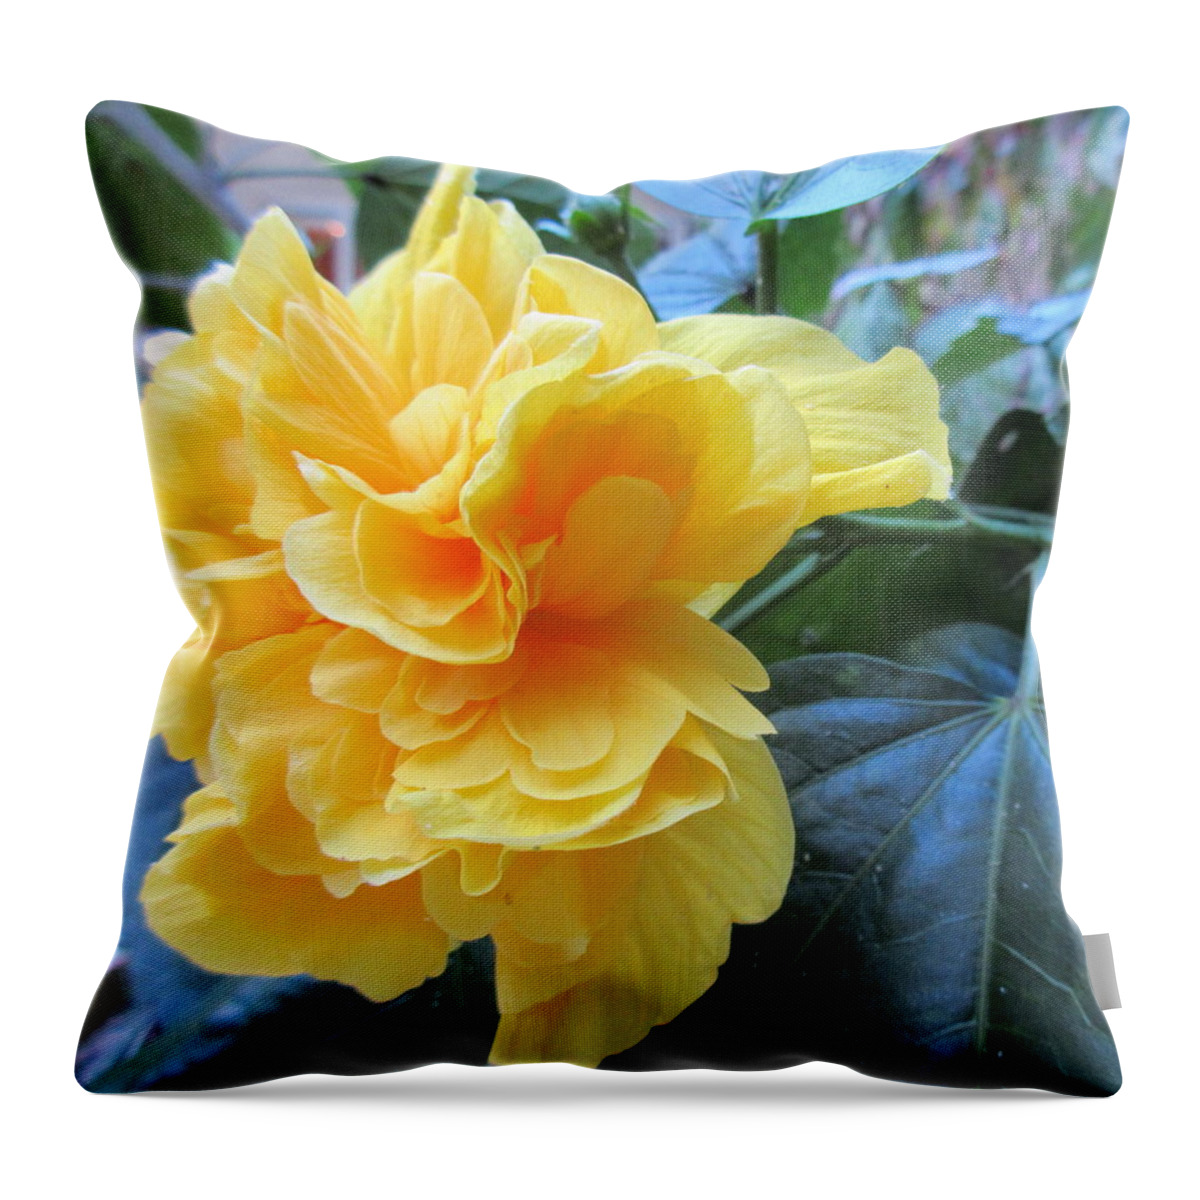 Yellow Throw Pillow featuring the photograph Sweet Spot by Ashley Goforth